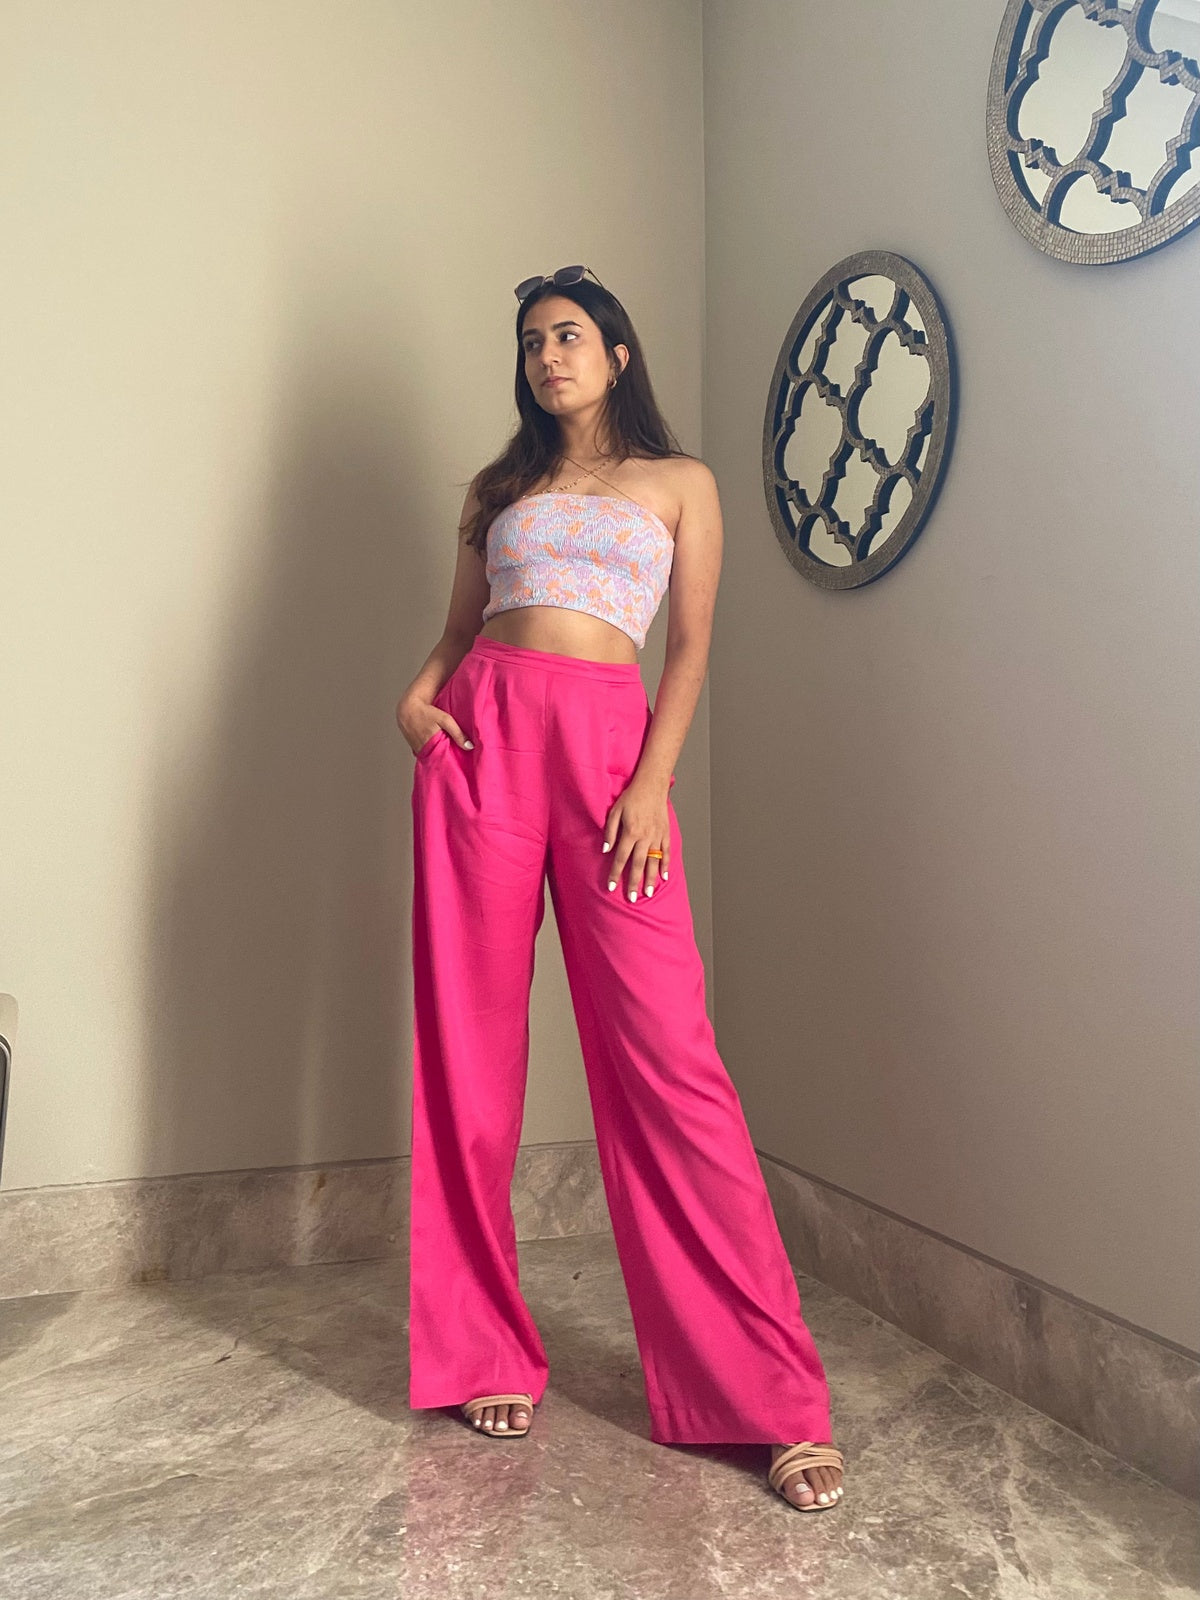 Pink Halter Wrap Top And Palazzo Satin Pants Set  Dusty pink outfits, Satin  wrap top, High waisted wide leg pants